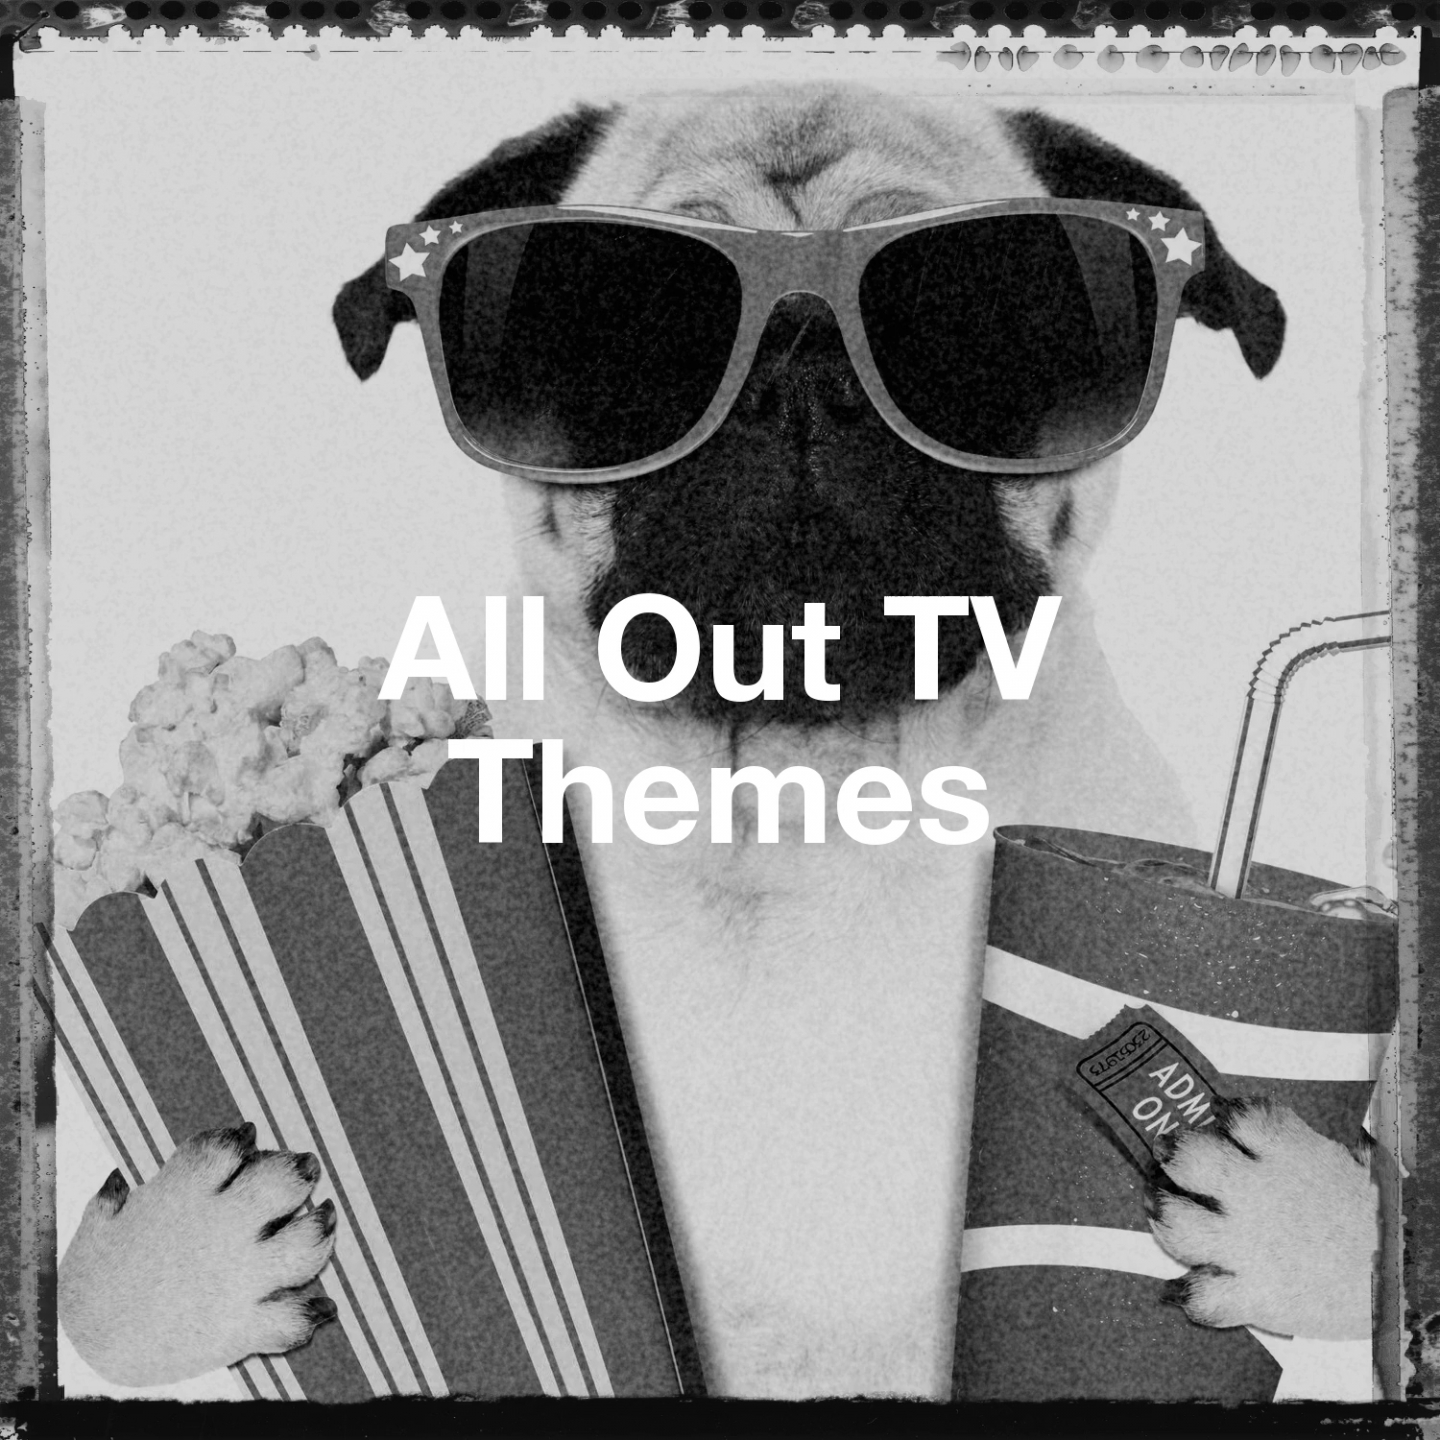 All out Tv Themes